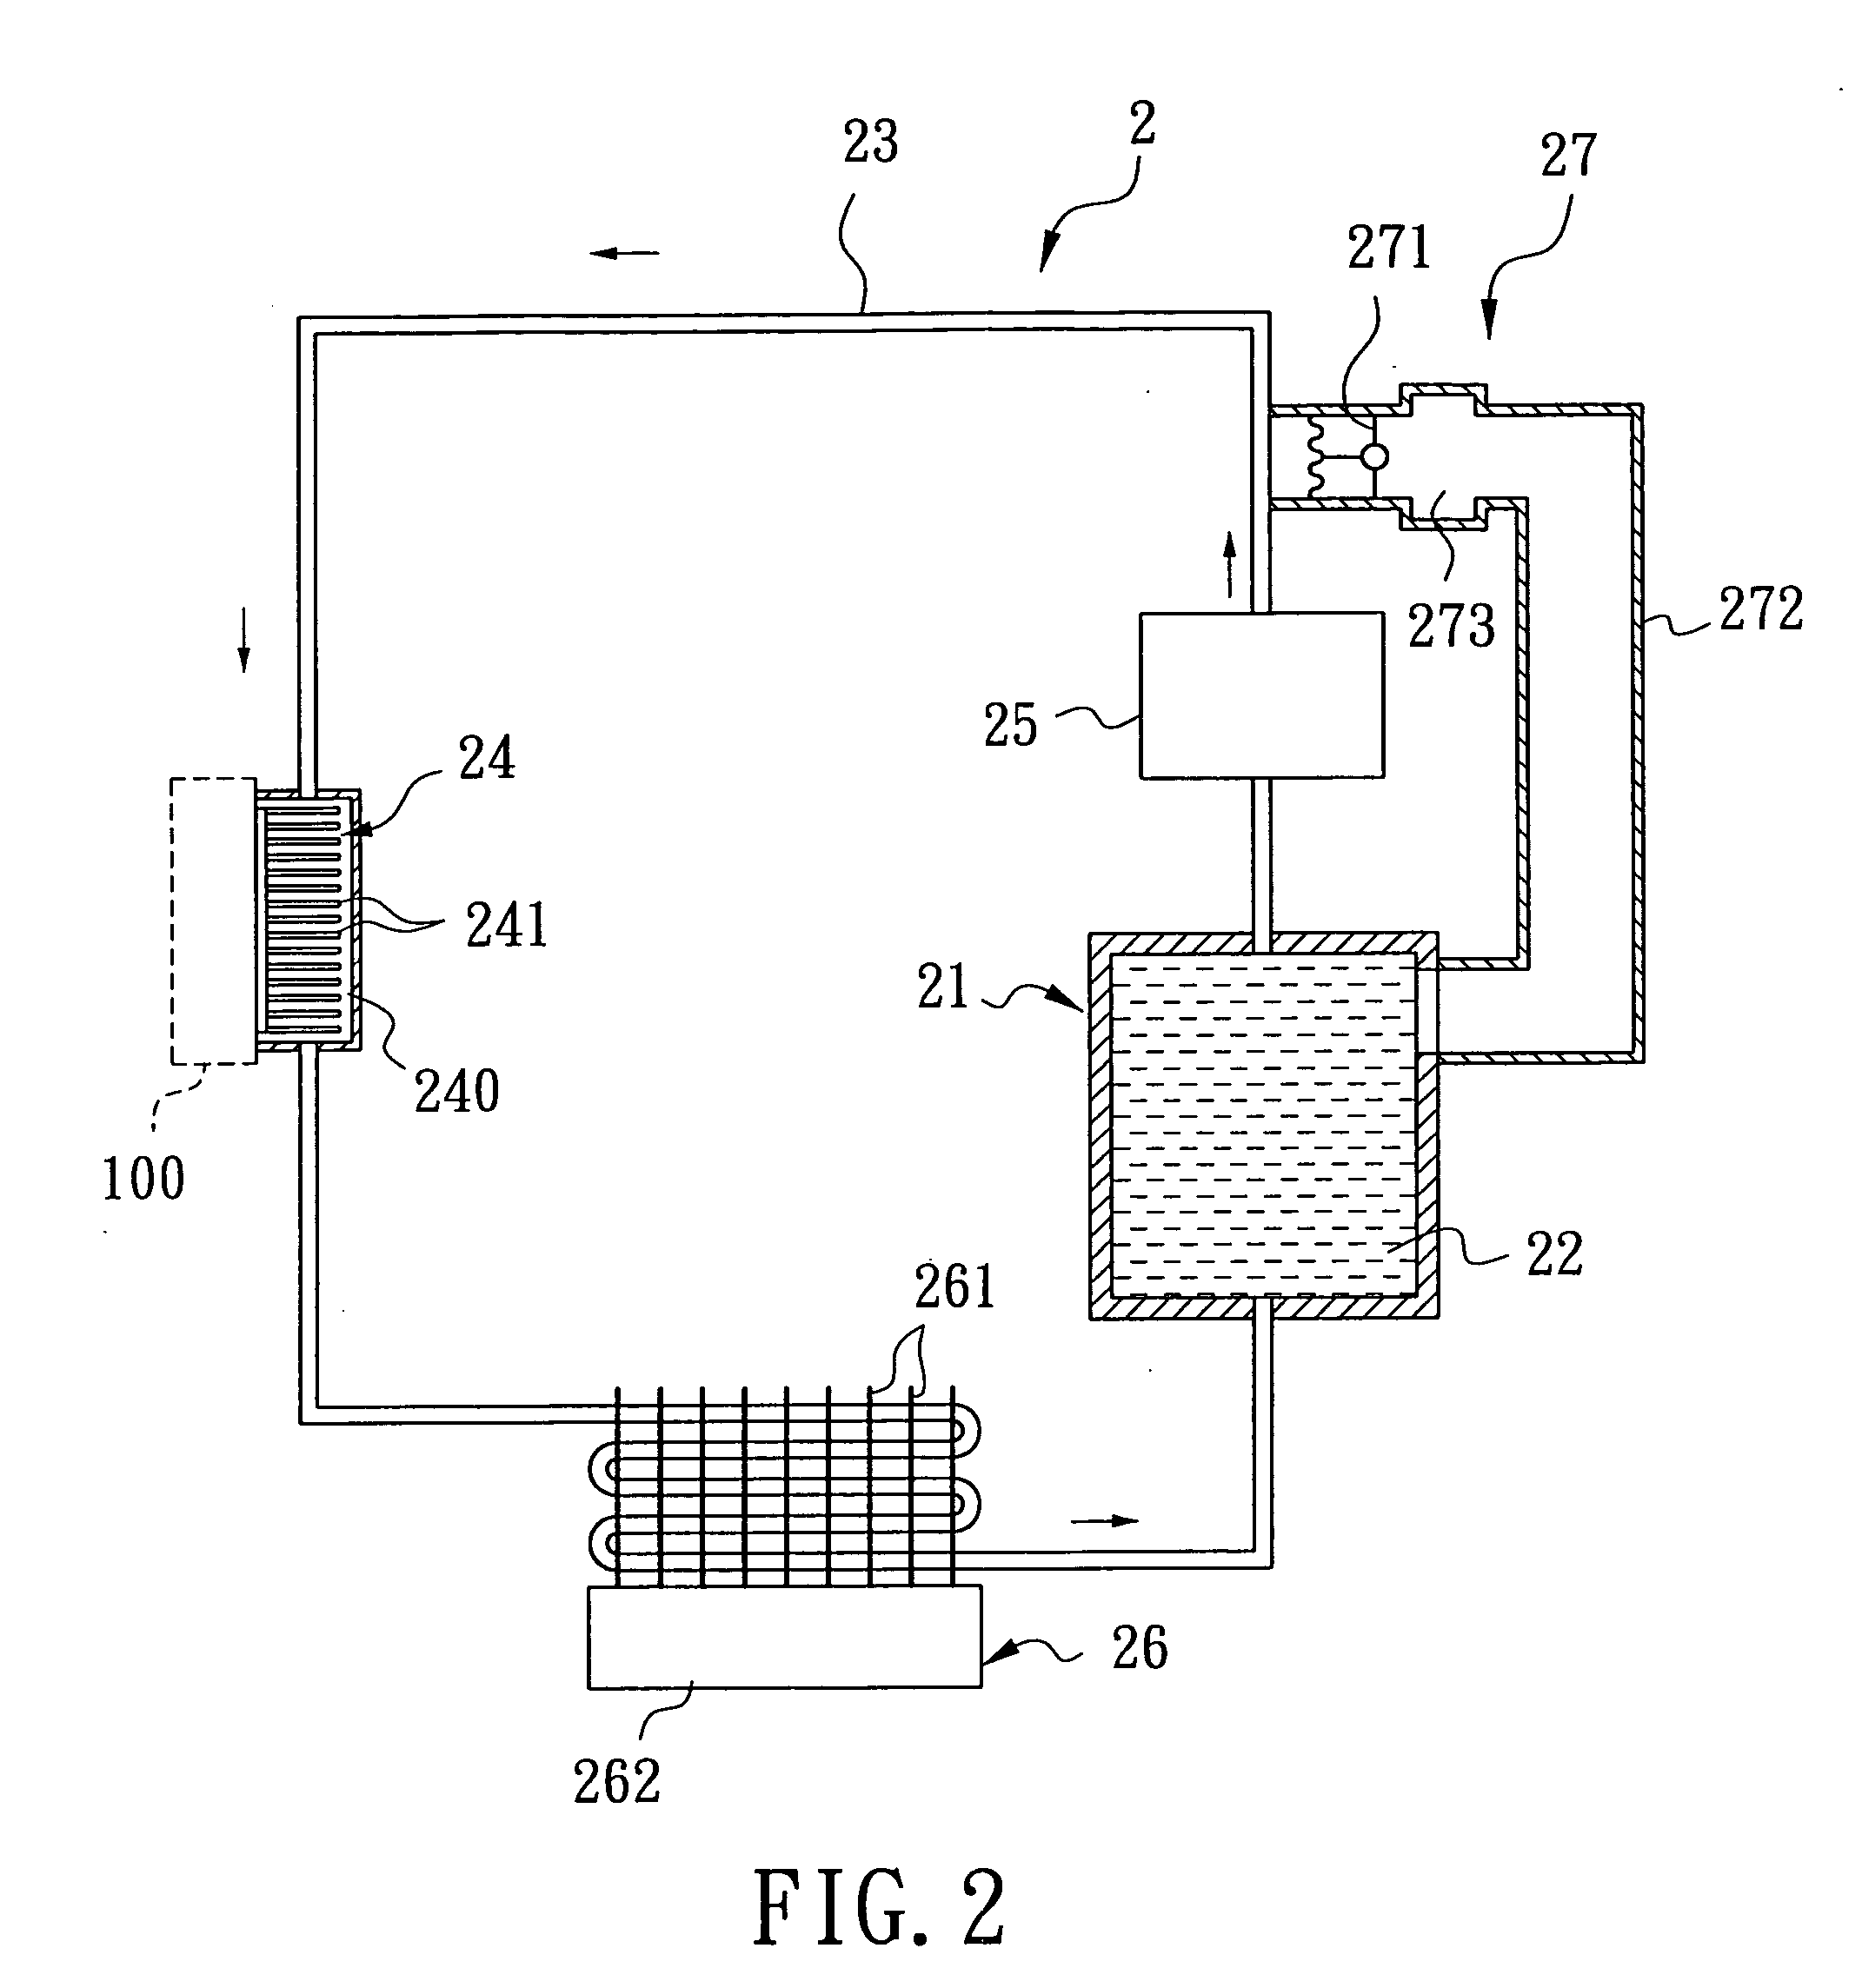 Heat dissipating system